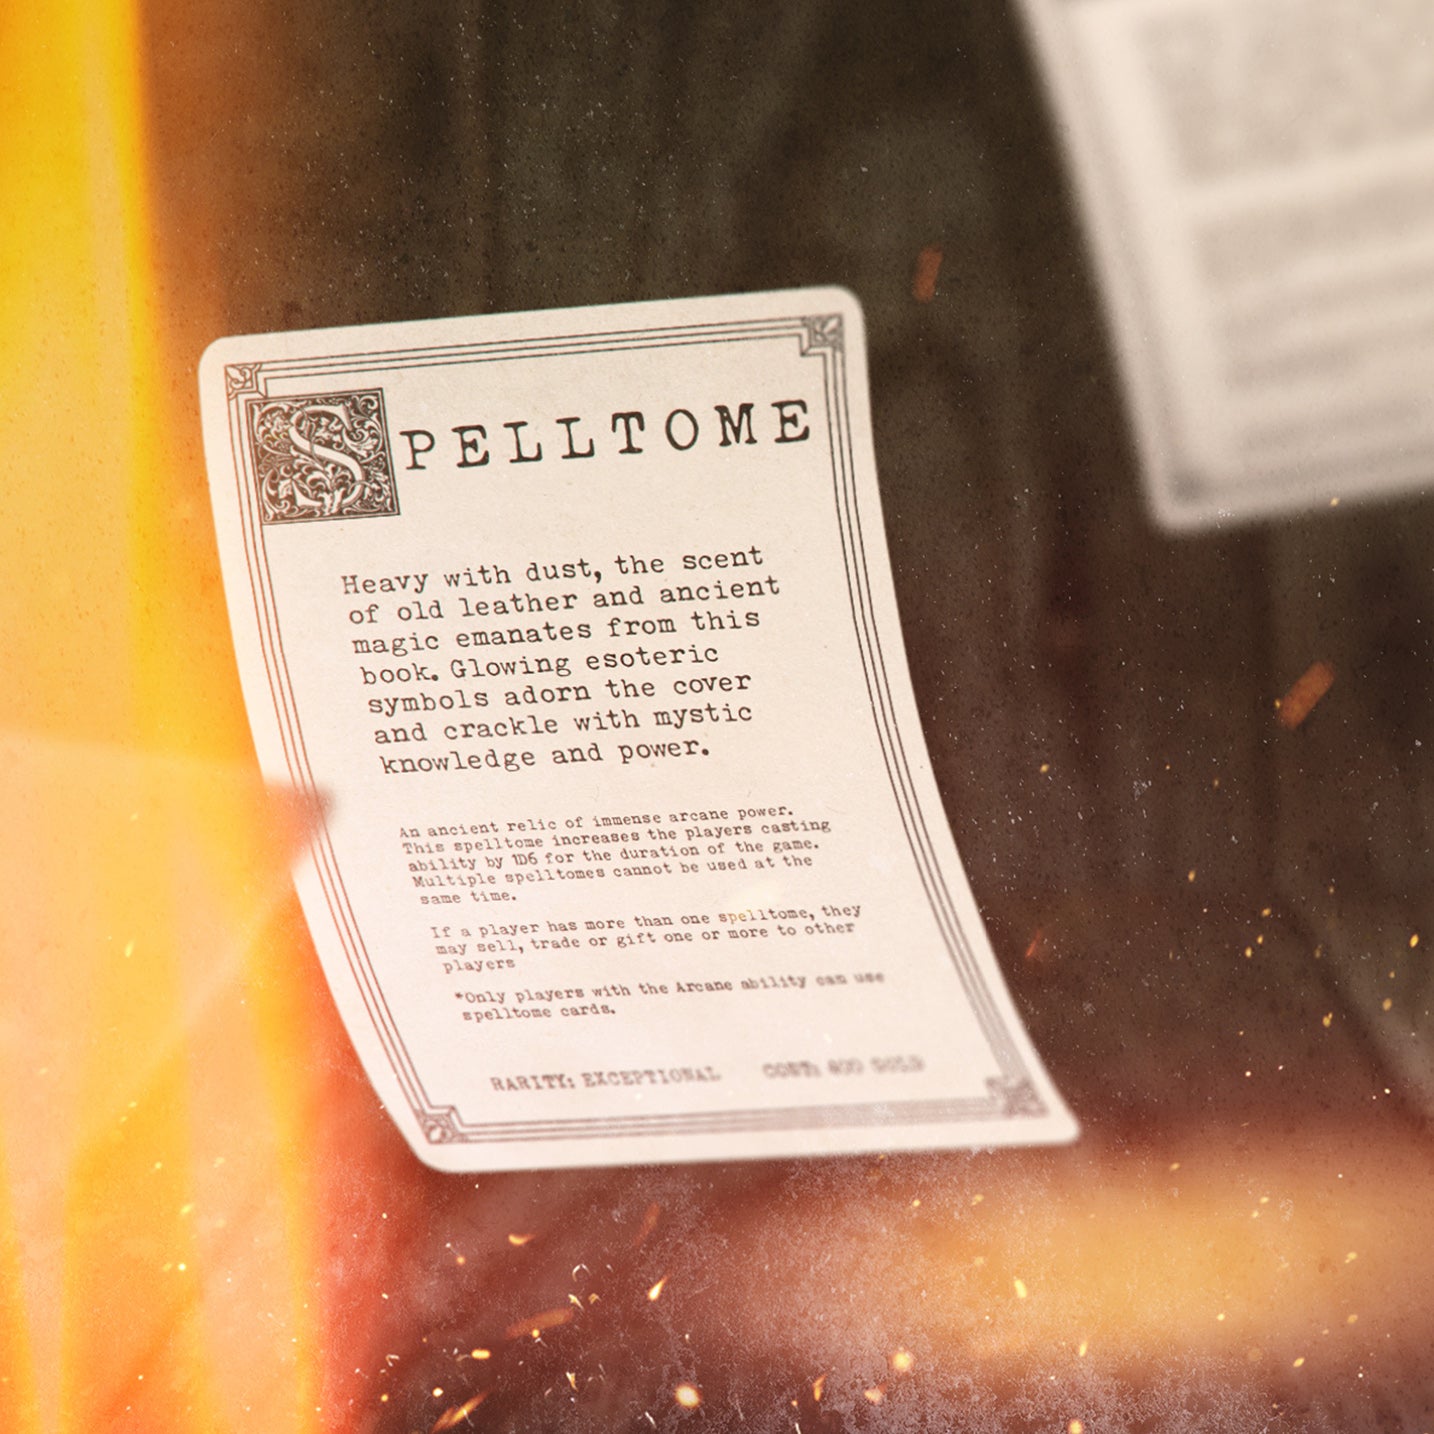 Illustration of a magical table top roleplaying card called Spelltome. Text set using the Merchant Ledger font with sparks and a arcane orange glow